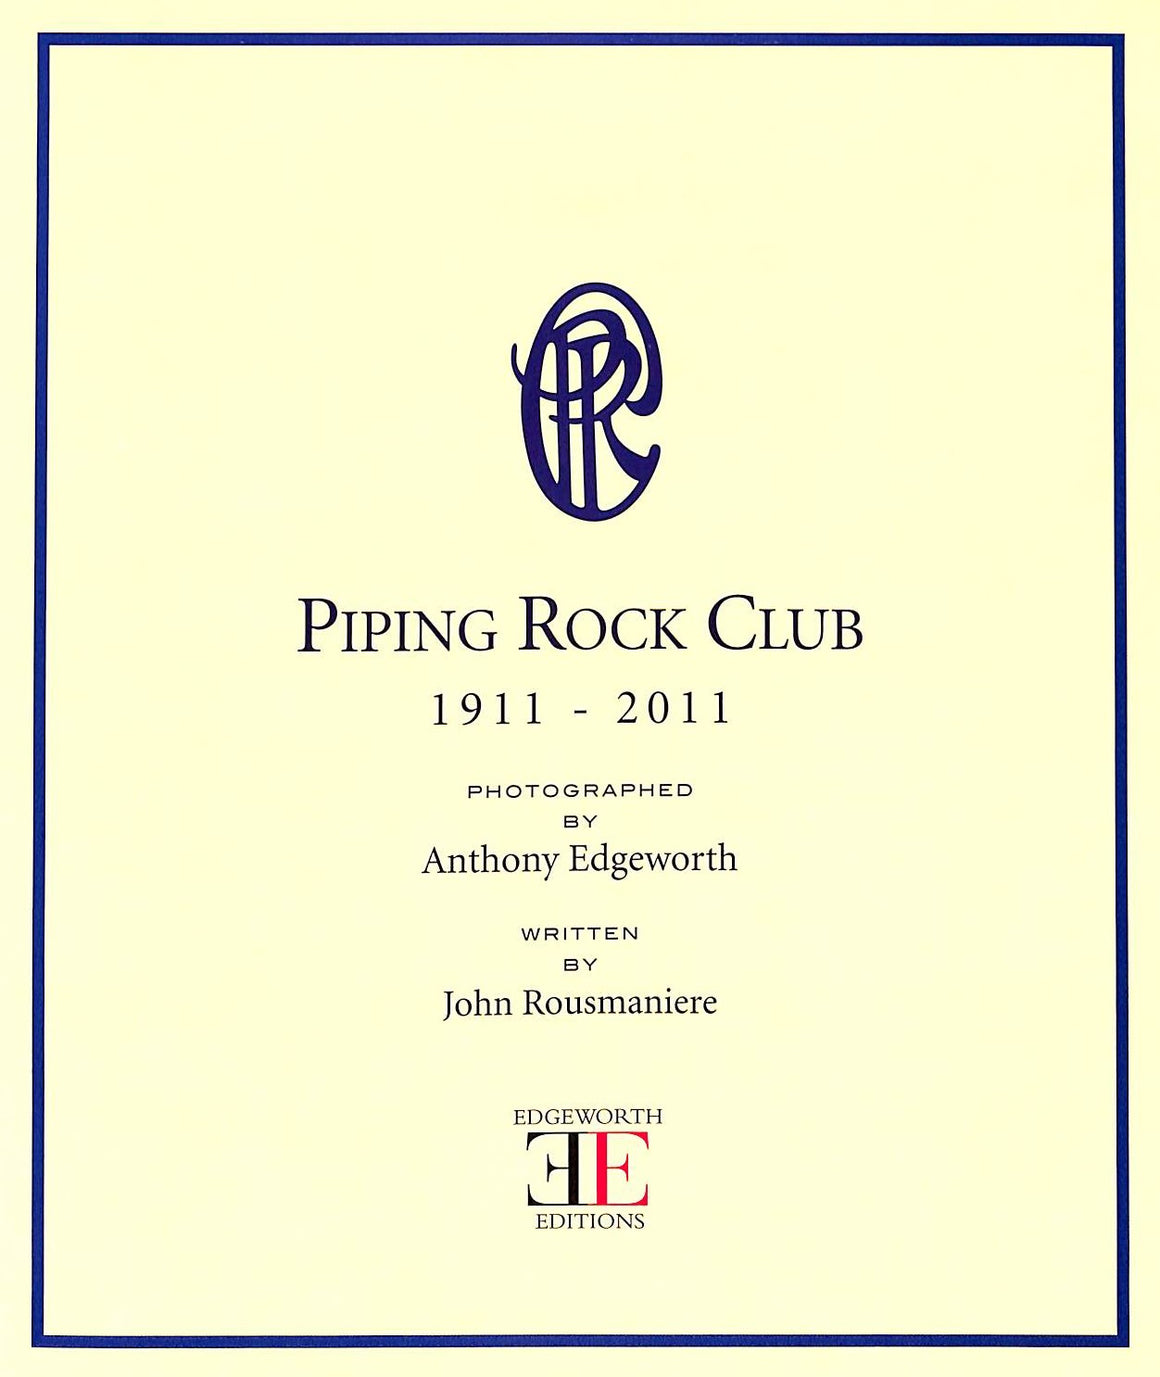 "Piping Rock Club 1911-2011" EDGEWORTH, Anthony and ROUSMANIERE, John (SOLD)